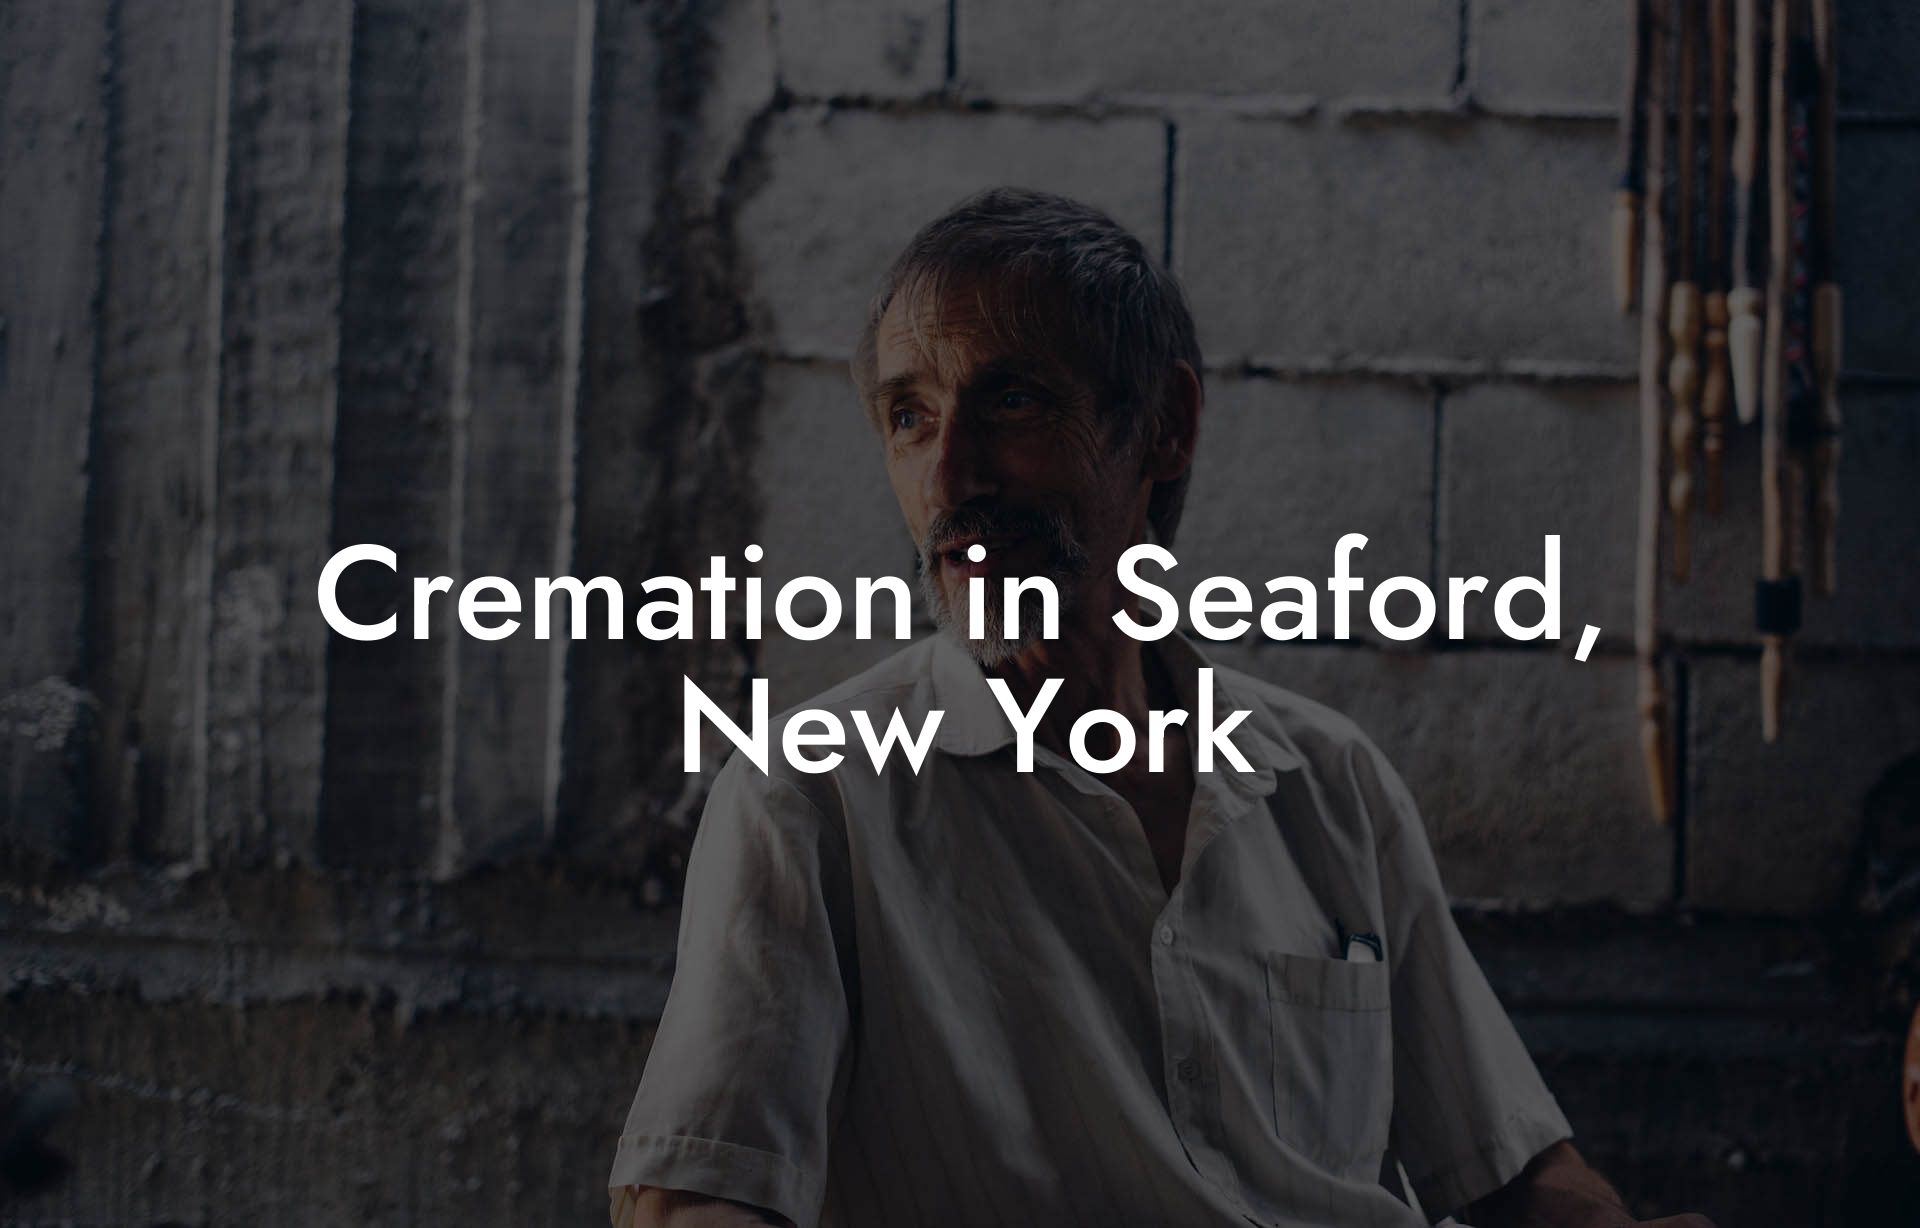 Cremation in Seaford, New York